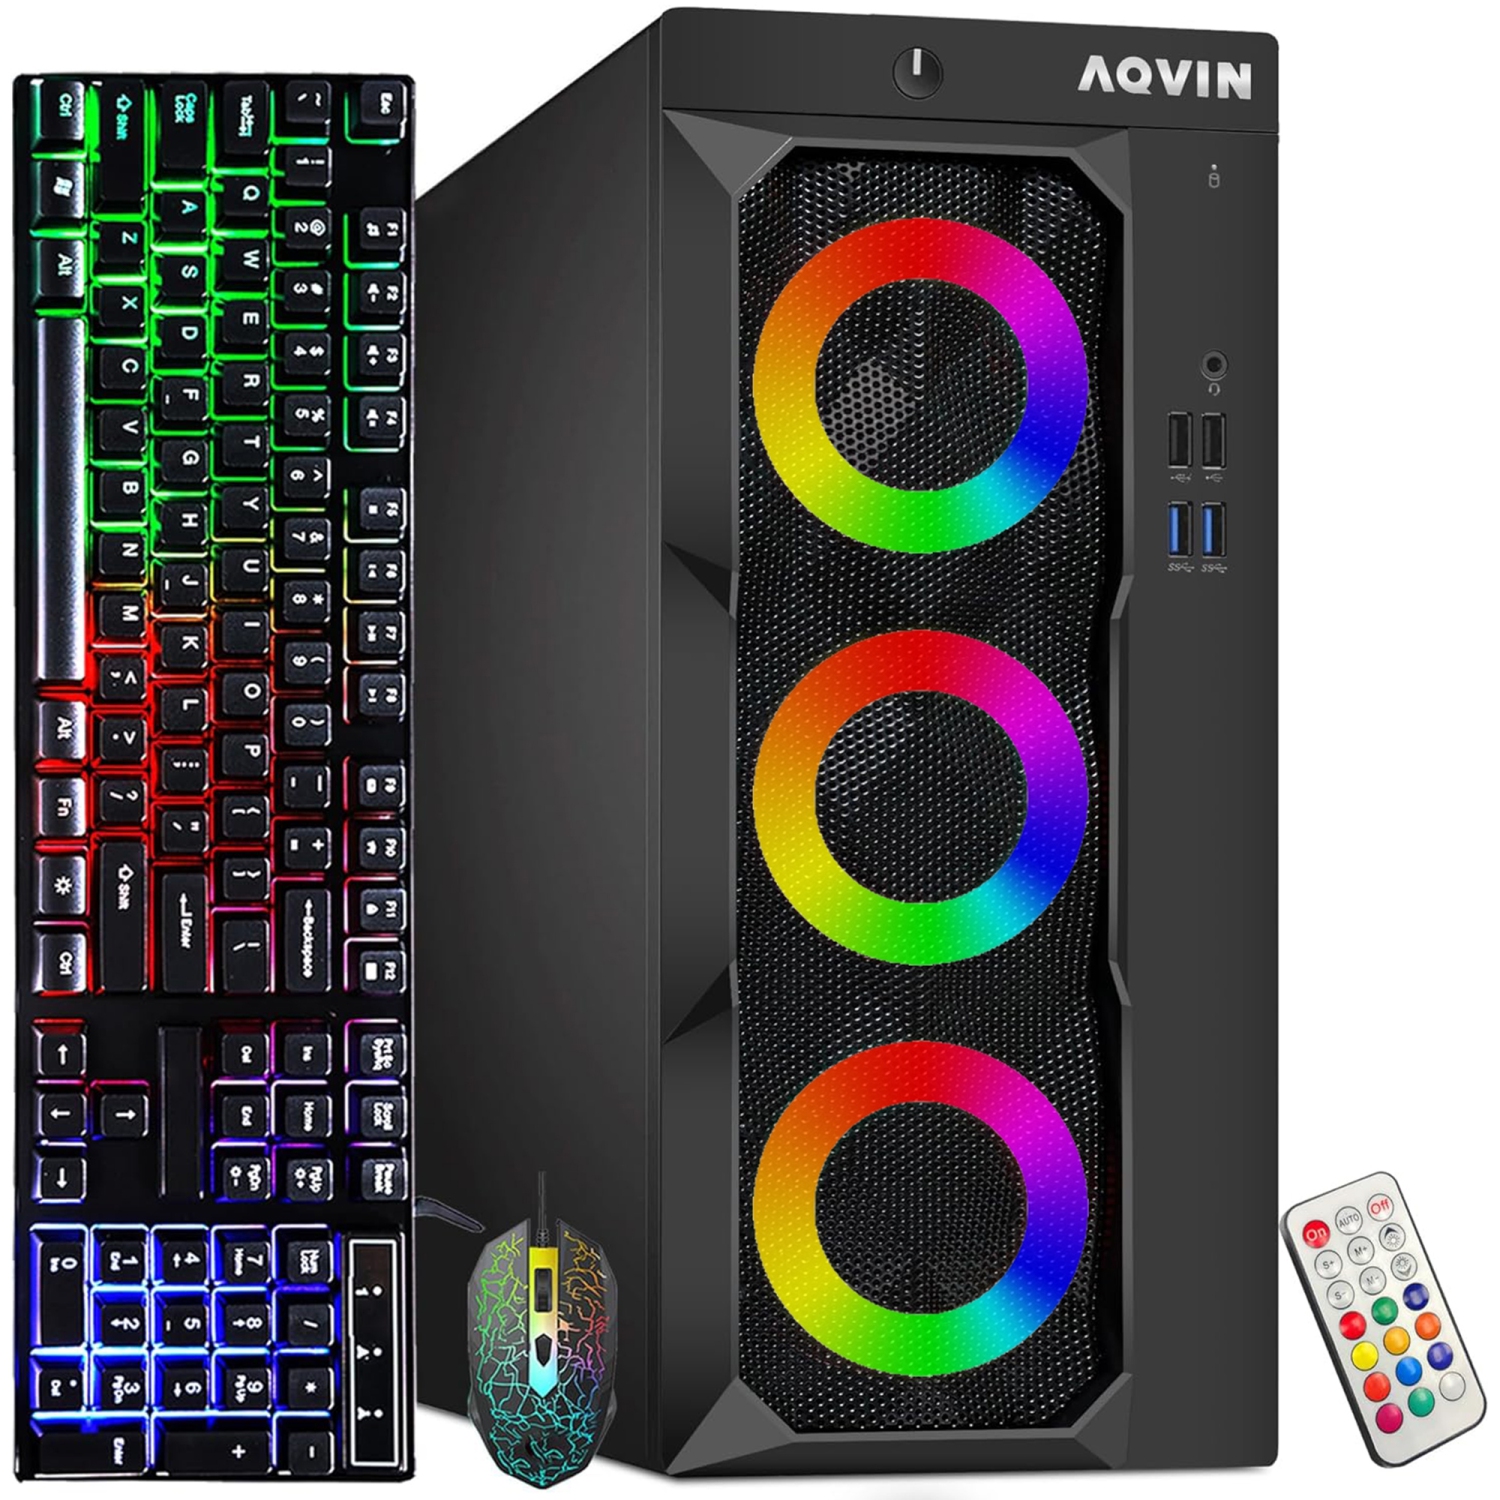 Refurbished (Excellent) - AQVIN LuminaRings Gaming Desktop Computer Tower PC, GeForce GTX 1050Ti, Intel Core i7 CPU, 32GB DDR4 RAM, New 2TB SSD, WIN 10 Pro, RGB Keyboard and Mouse